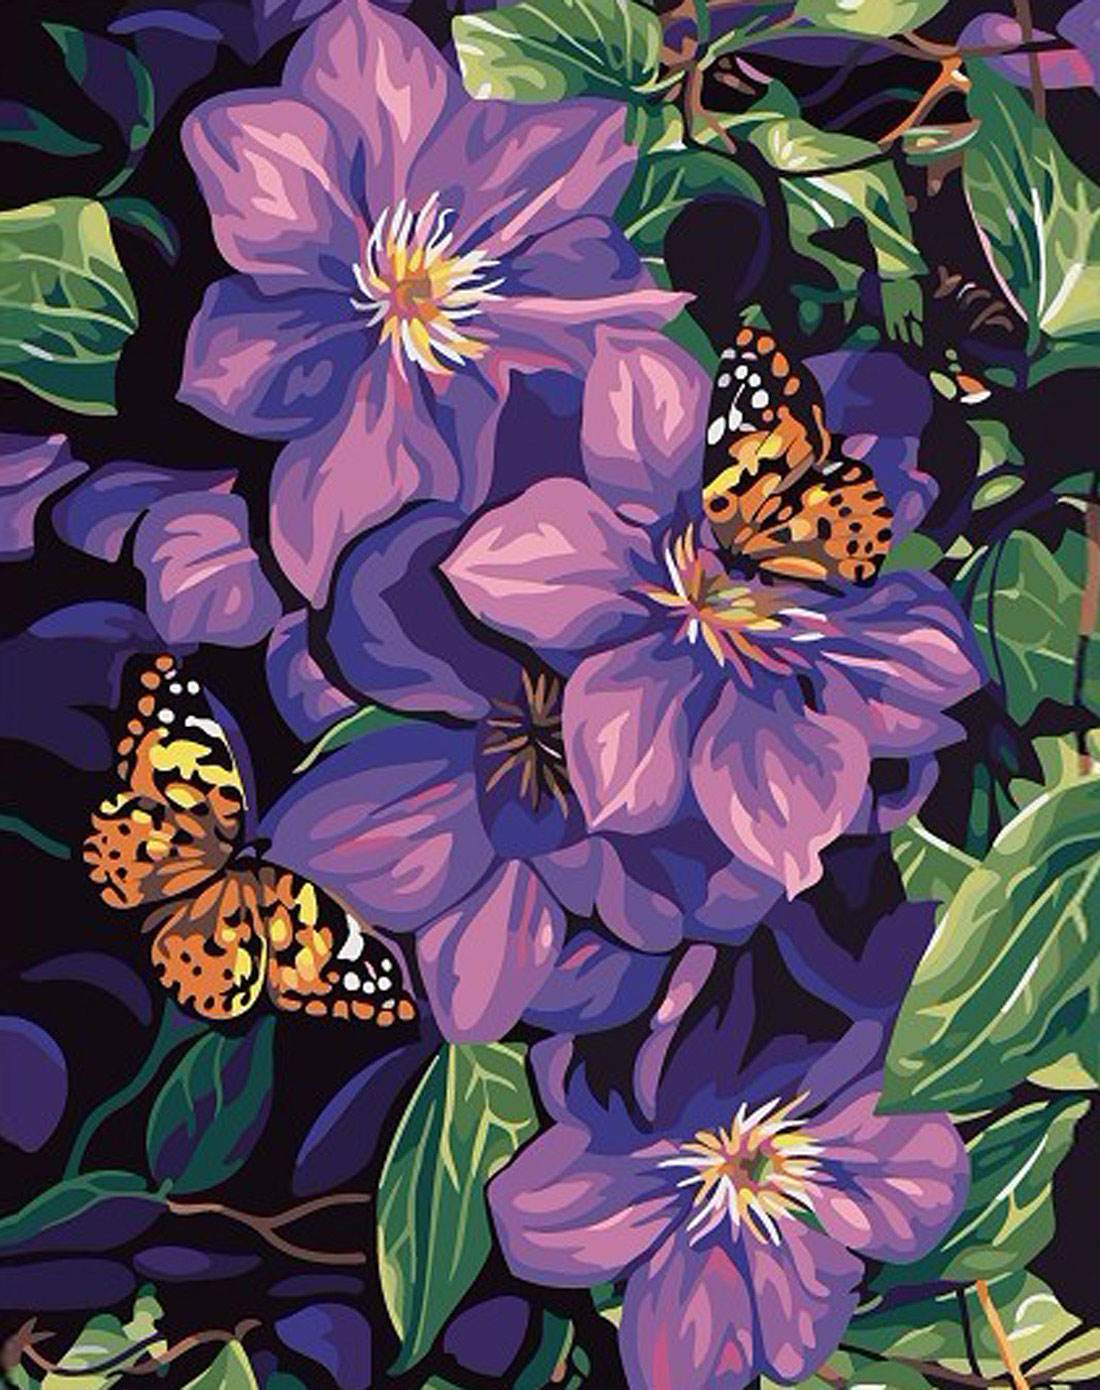 ColourMost™ DIY Painting By Numbers - 'Purple Flowers & Butterflies' (16"x20")